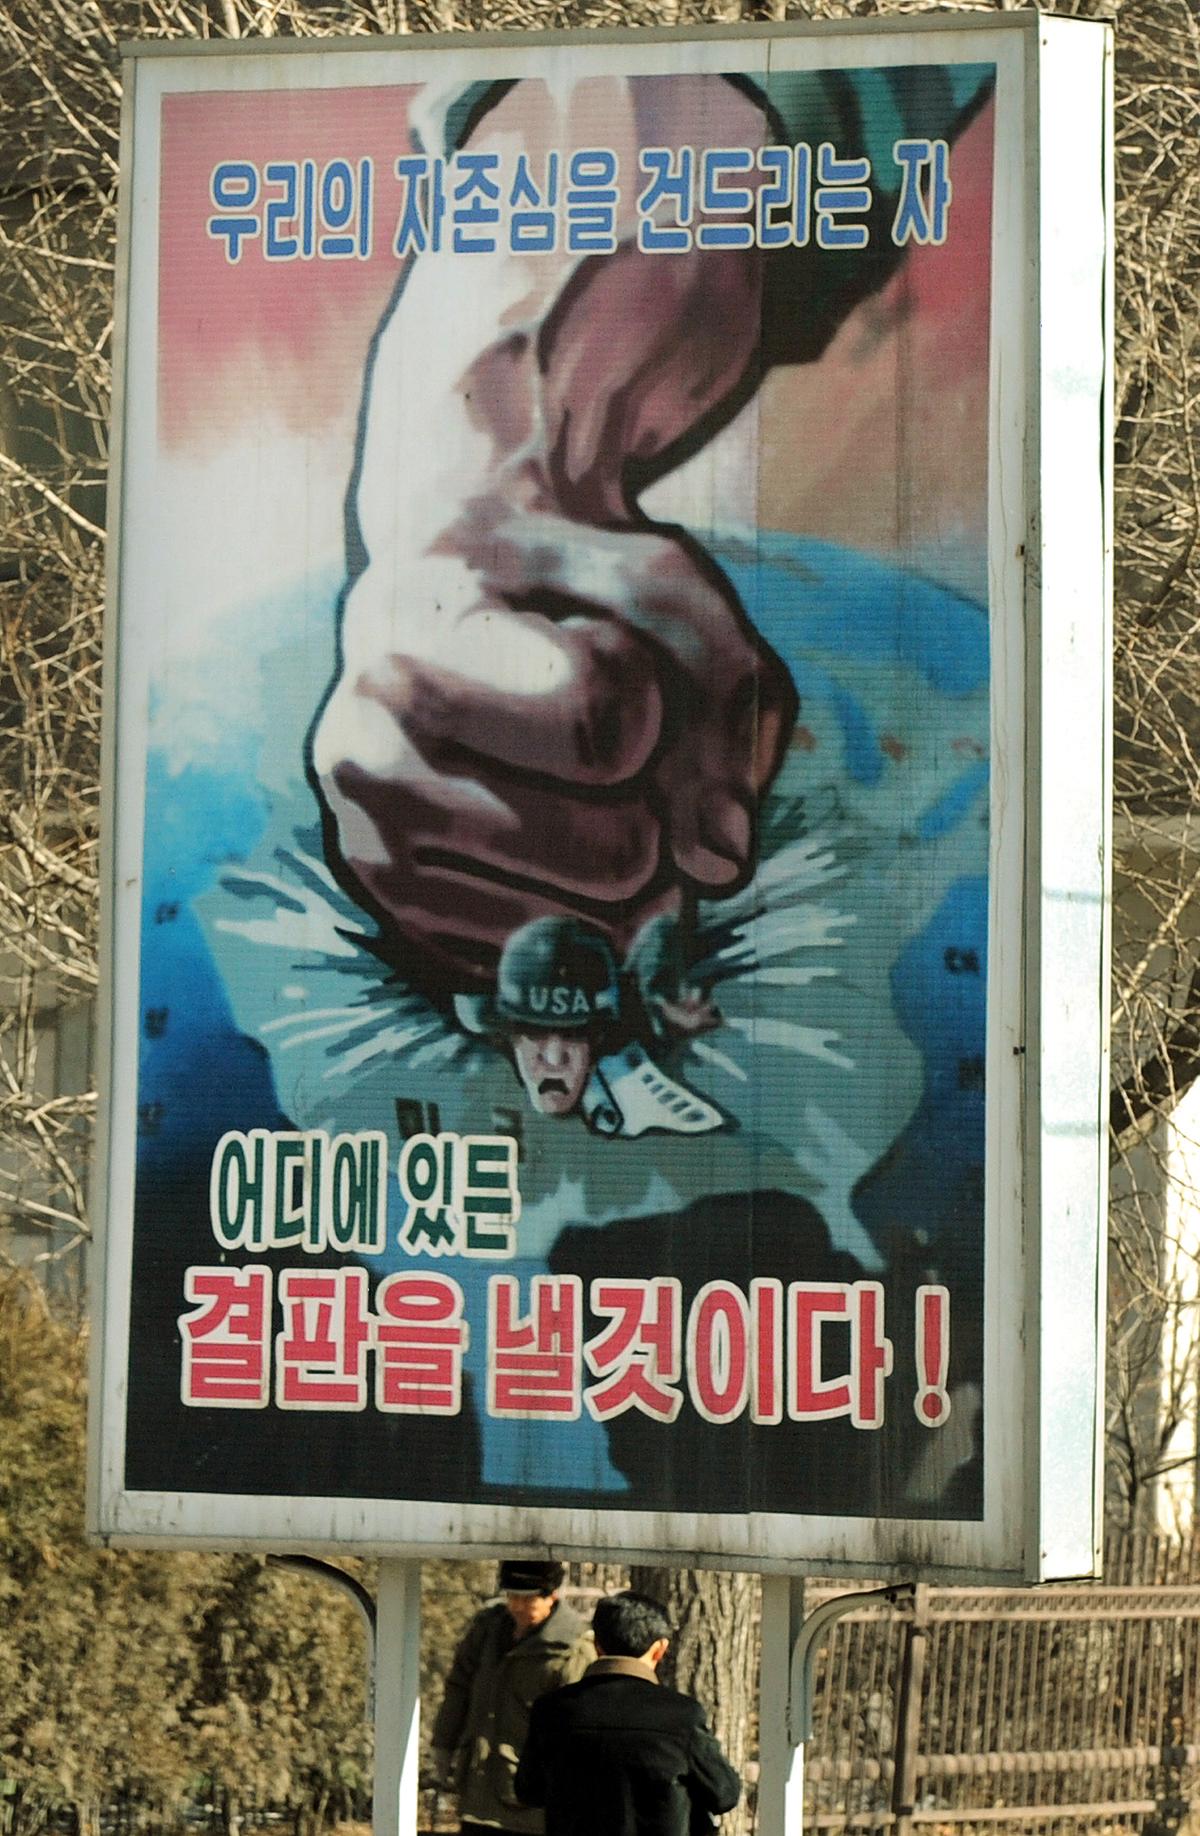 An anti-U.S. propaganda poster showing a fist crushing a U.S. soldier on a display on the streets of the North Korean capital Pyongyang, on Feb. 27, 2008. (Mark Ralston/AFP via Getty Images)